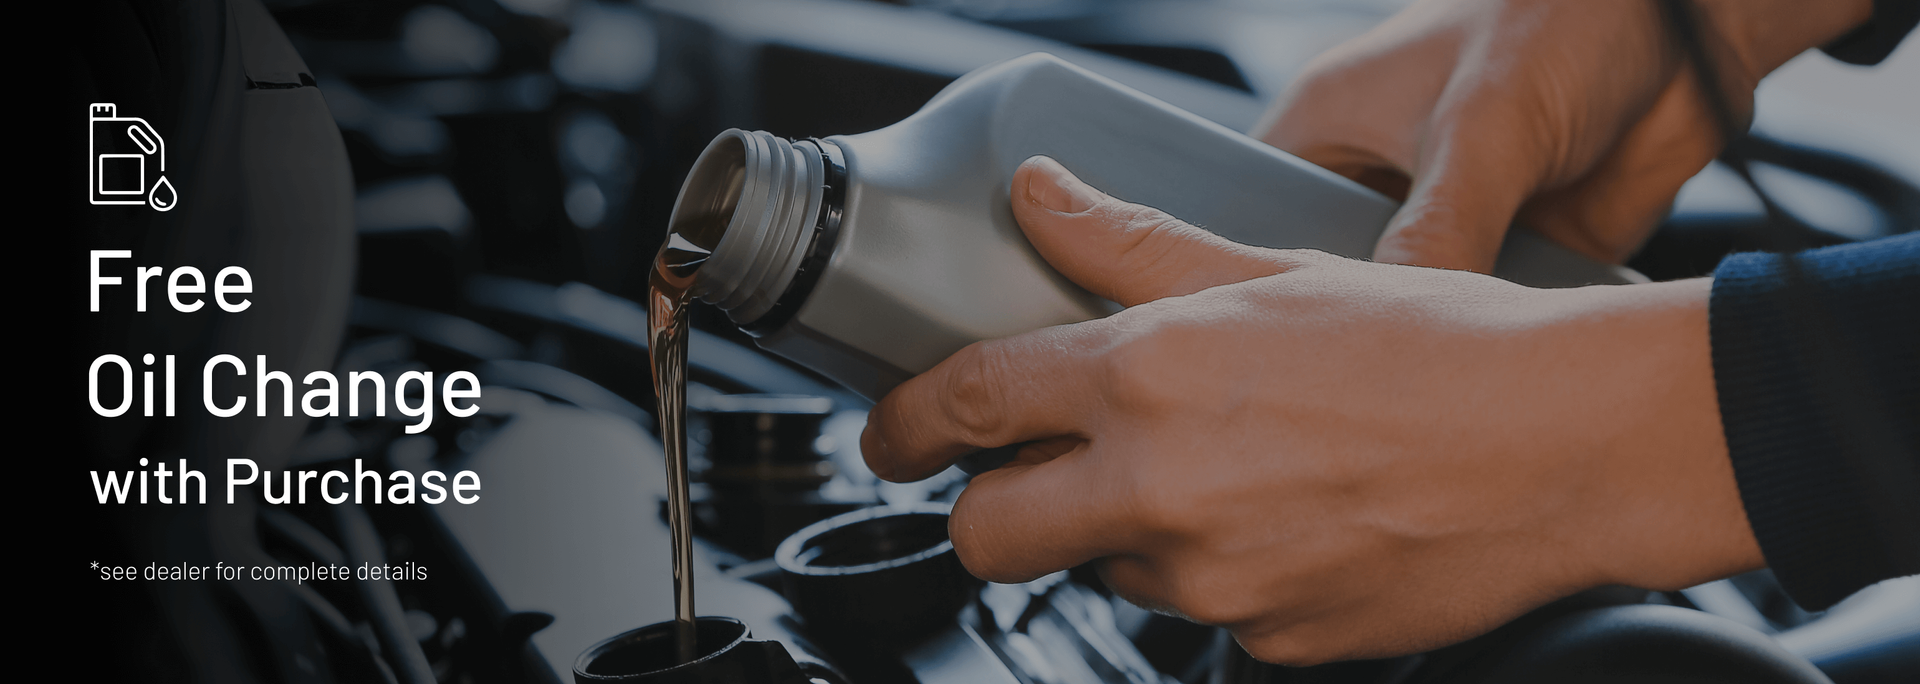 Free Oil Change With Purchase Banner